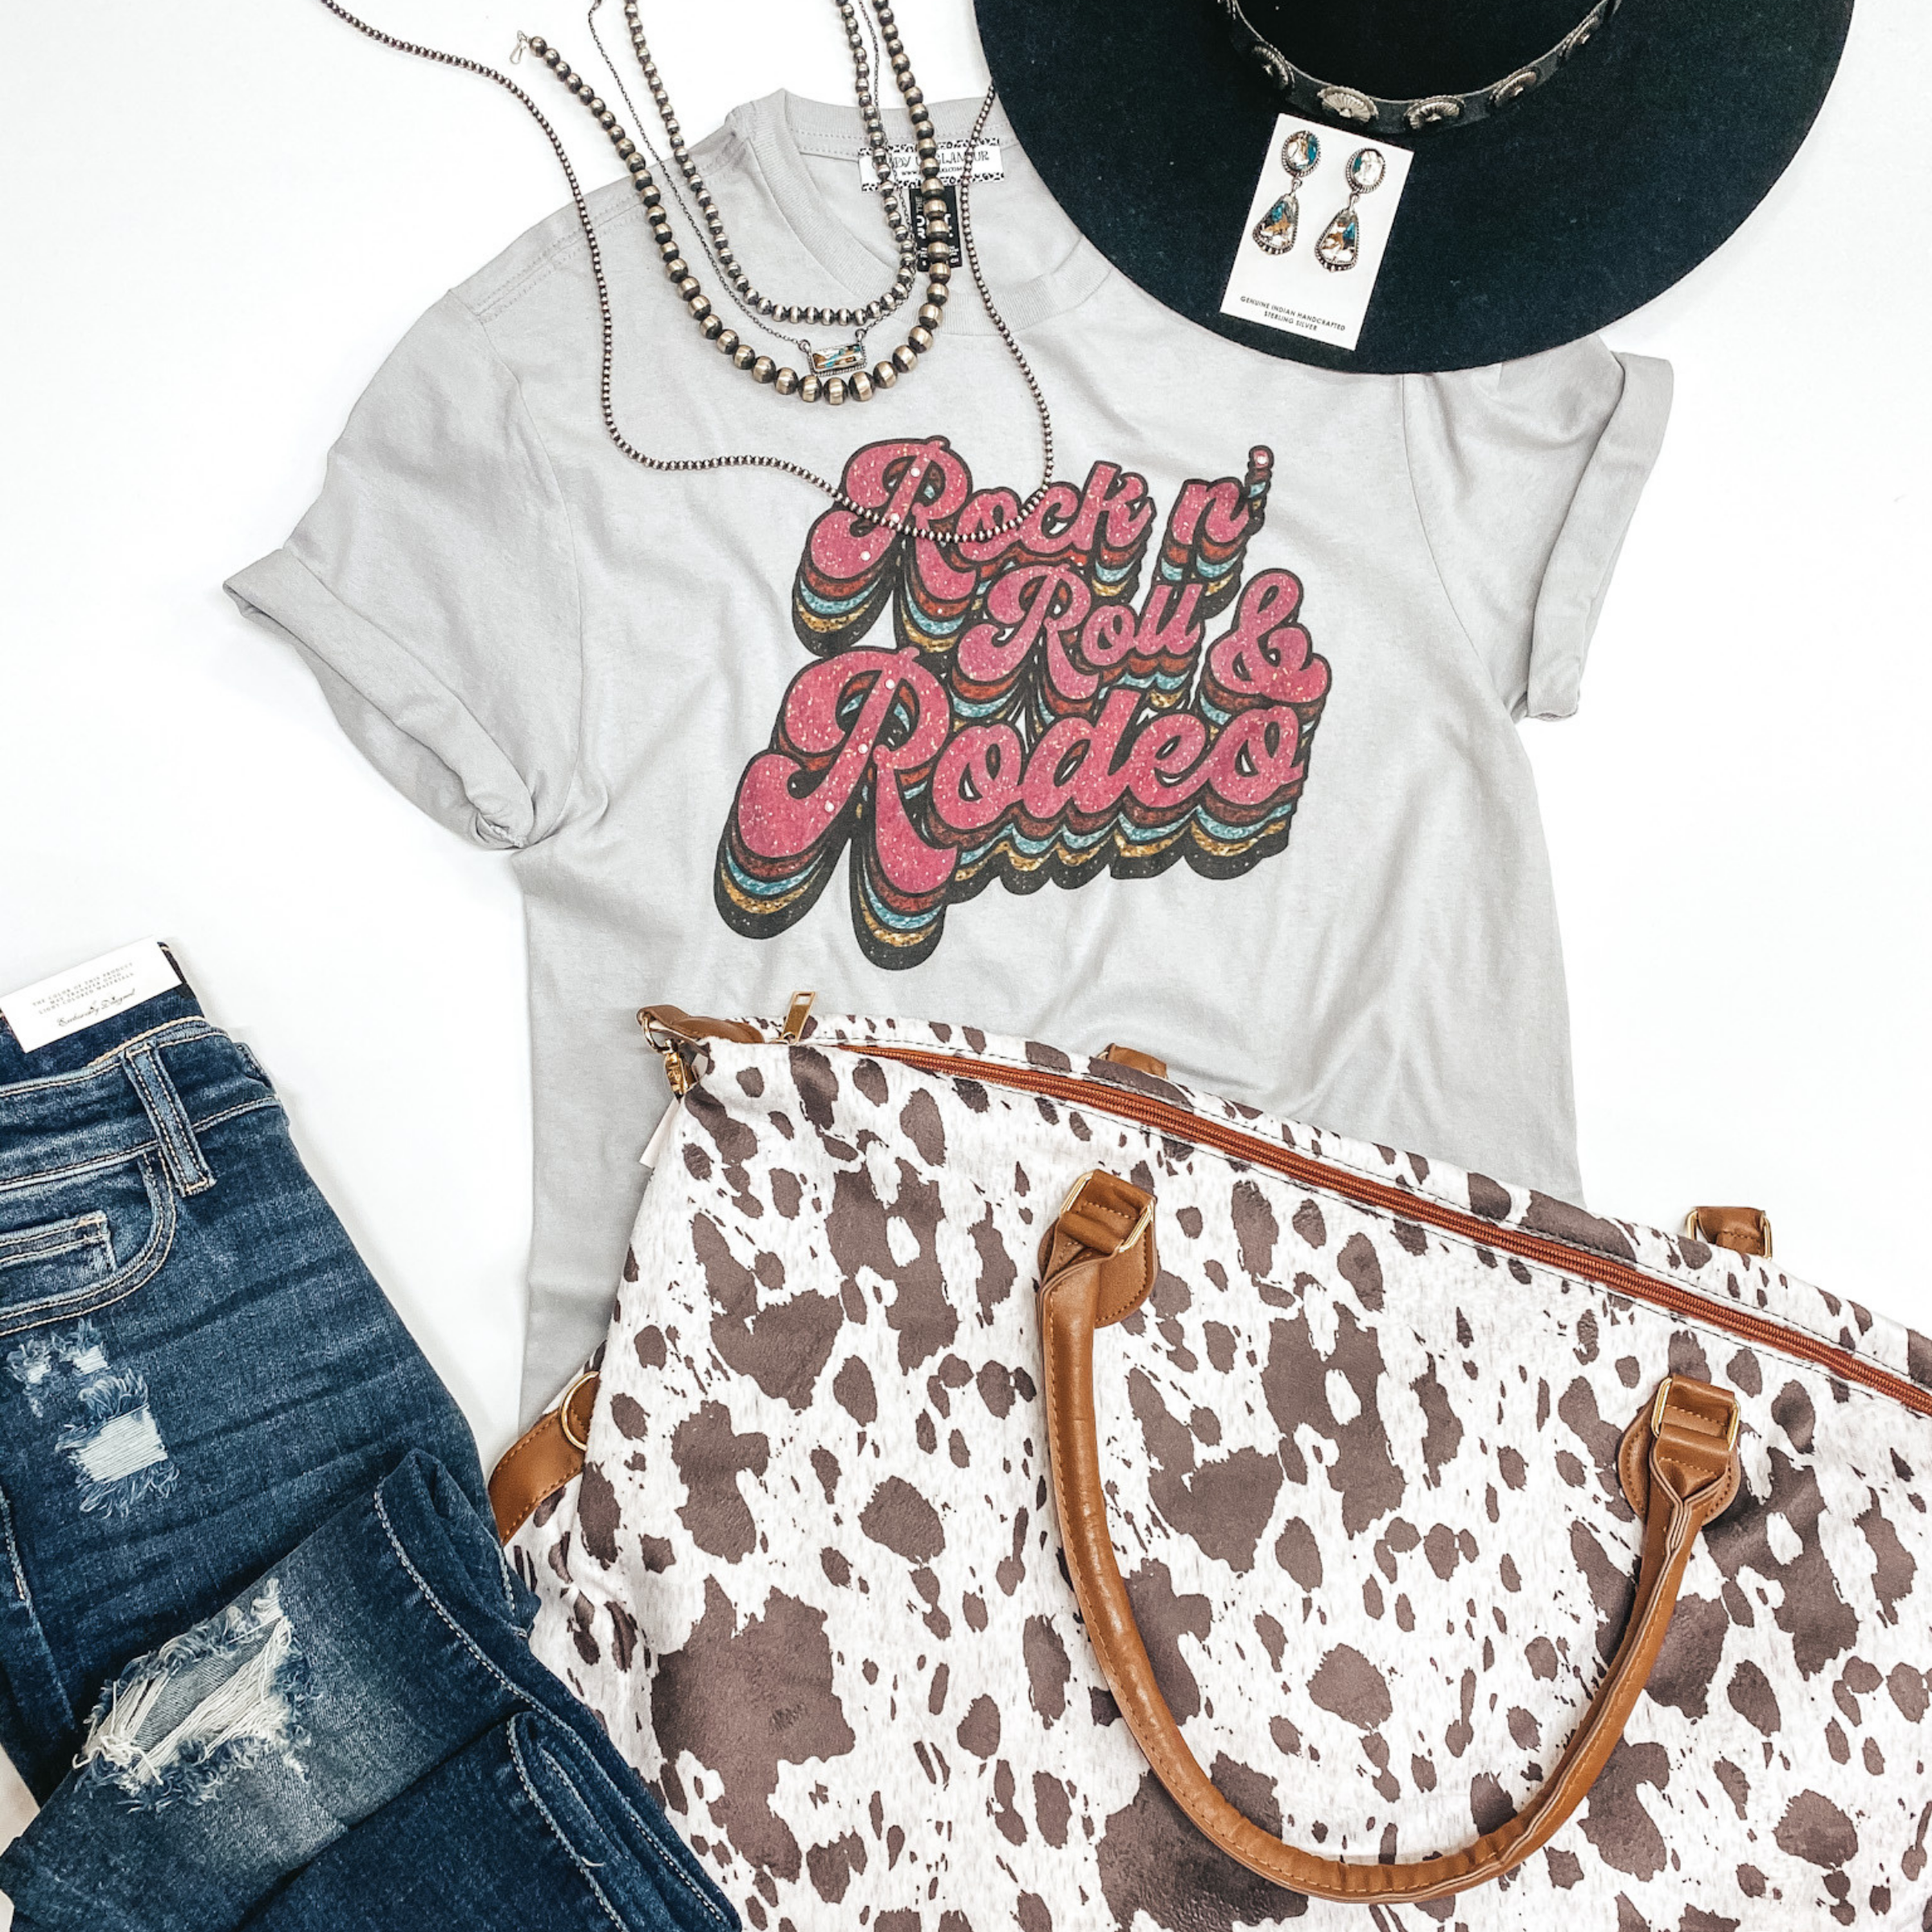 Rock N' Roll & Rodeo Retro Print Graphic Tee in Grey - Giddy Up Glamour Boutique